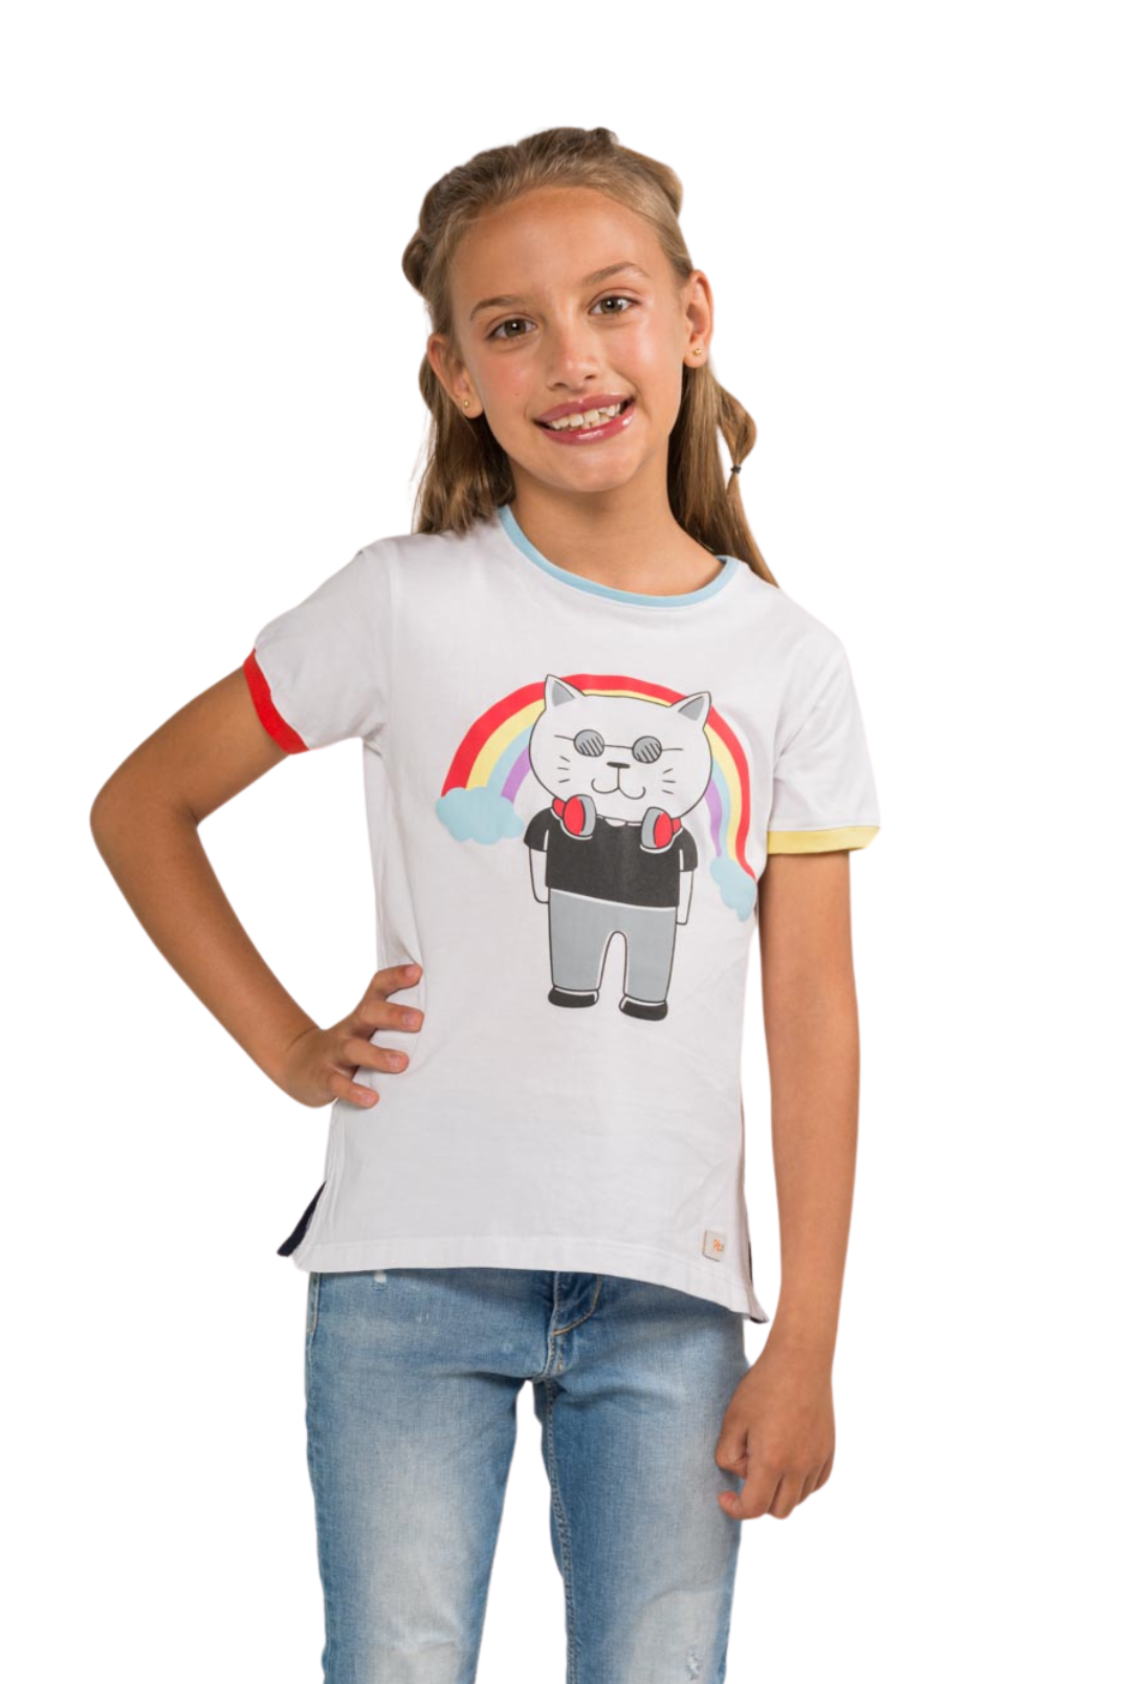 White T-Shirt, made in Peruvian Pima cotton with a Cat and rainbow print - Non-stereotypes design by Prisma Kiddos